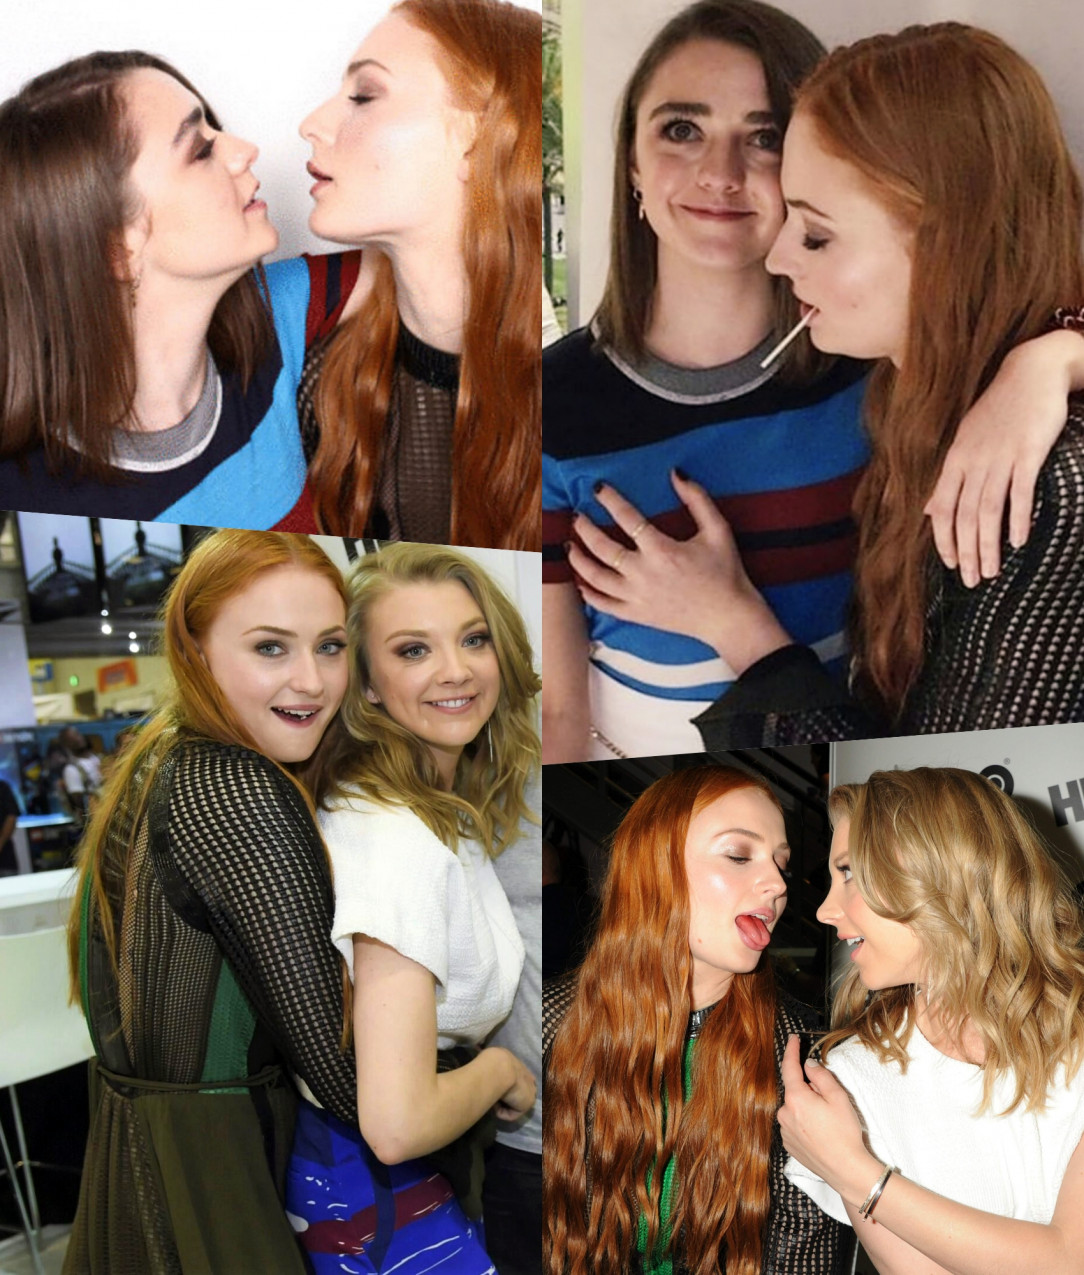 Sophie seems to enjoy being close friends with her co-stars Maisie Williams &amp;amp; Natalie Dormer